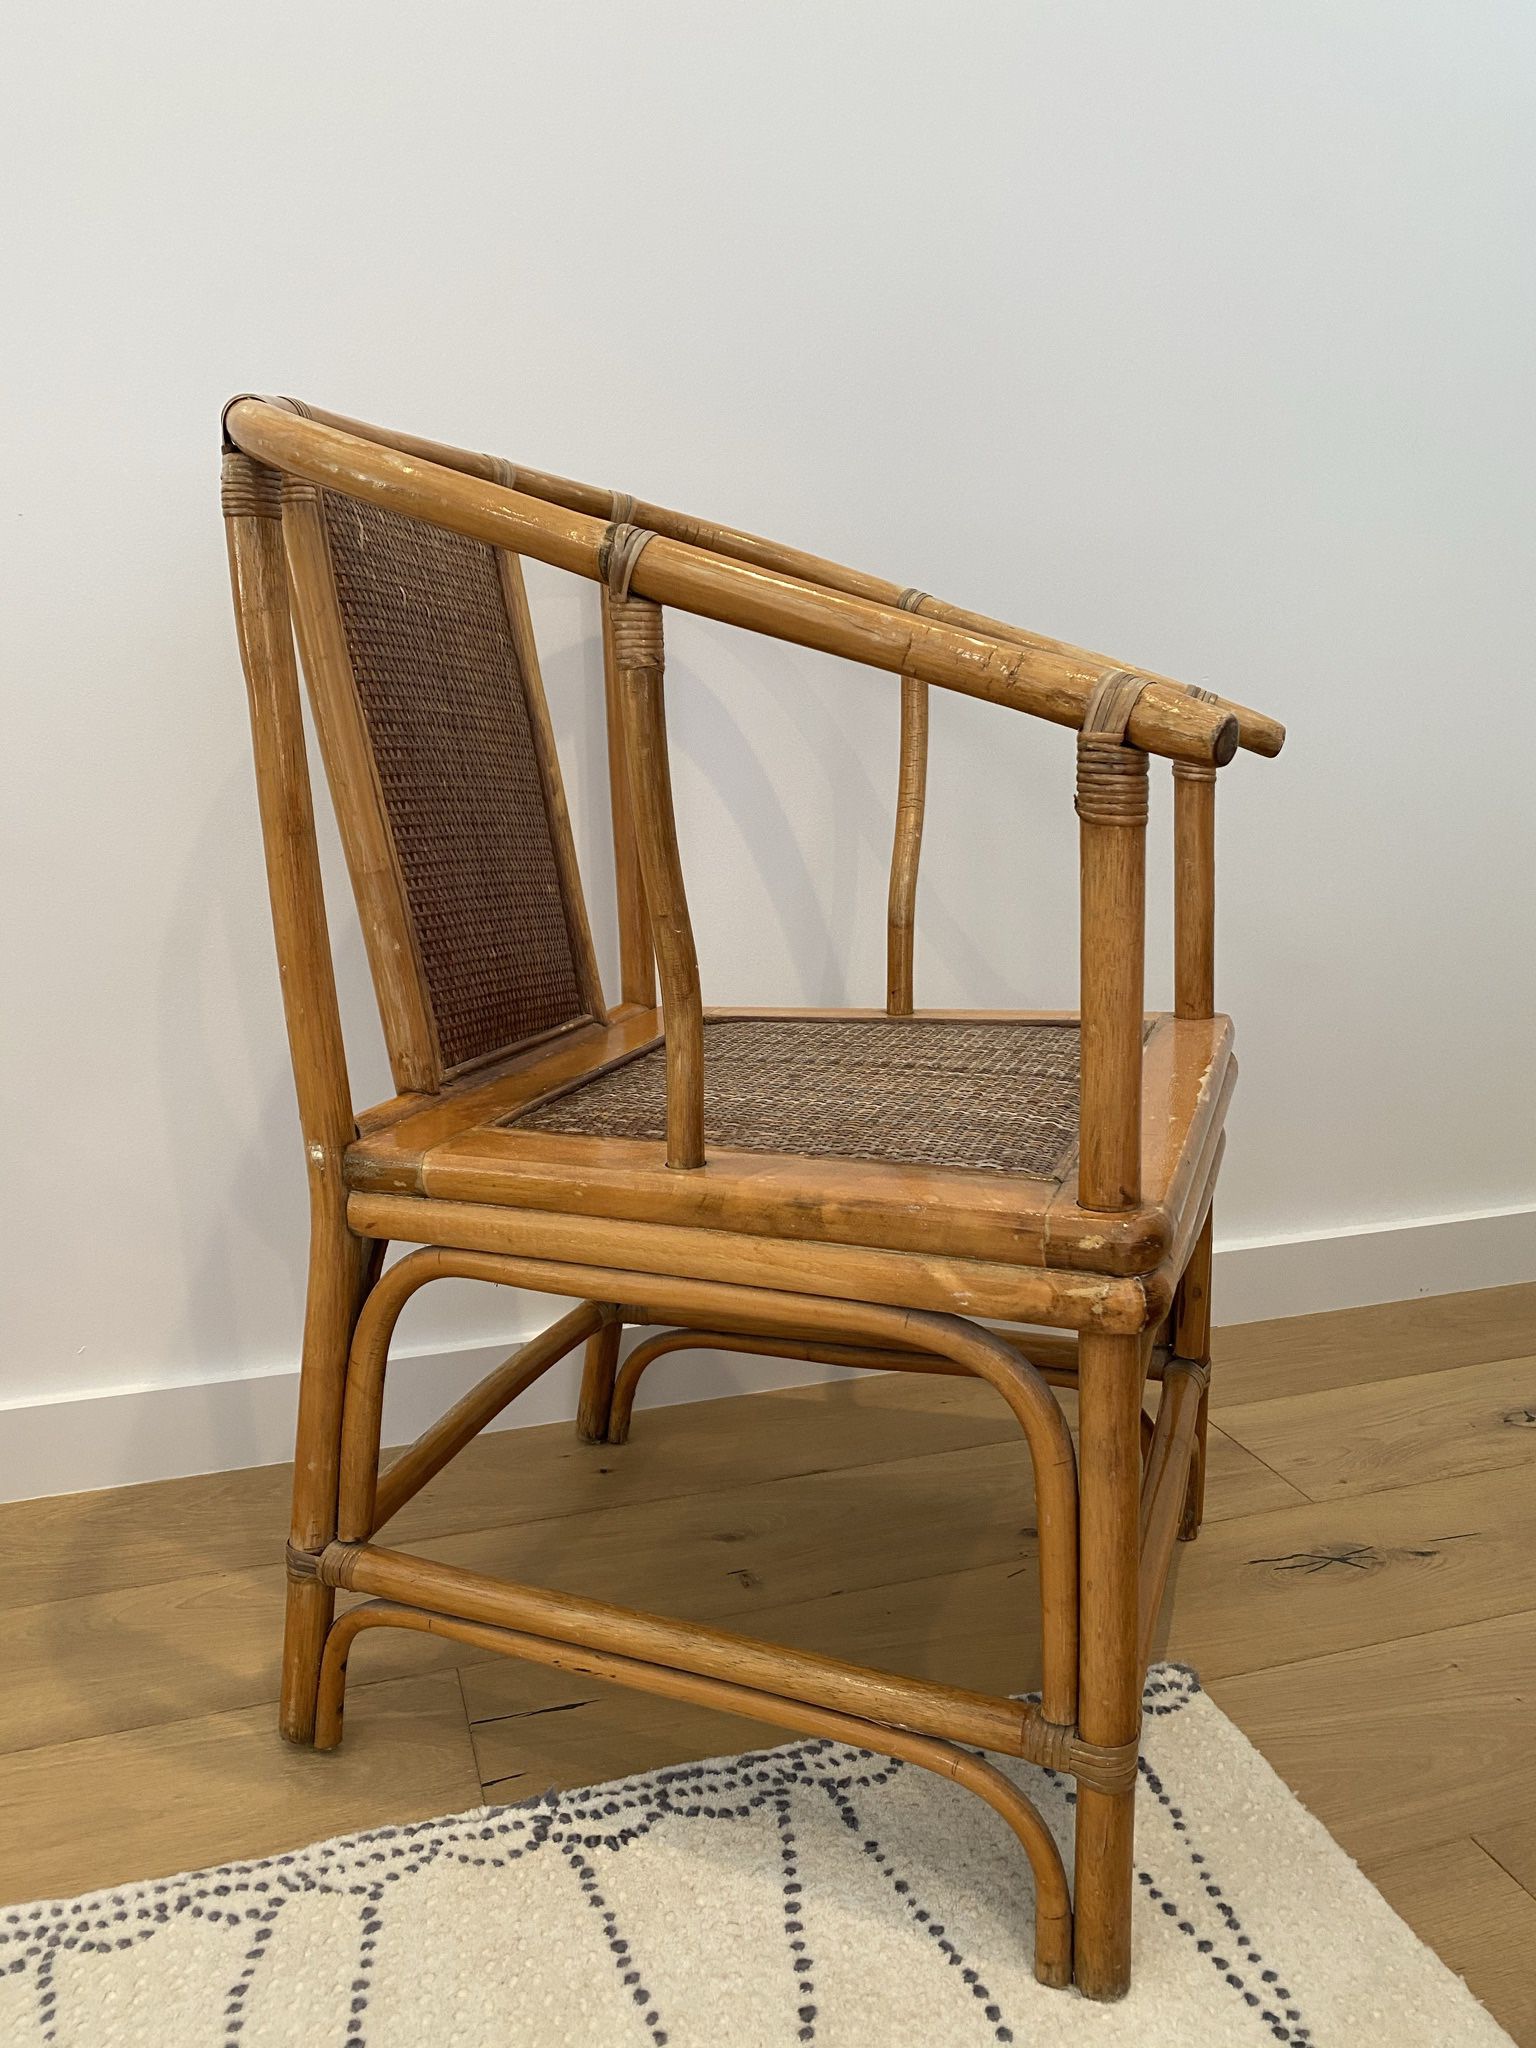 Pacific Home Bamboo Club Chair $65 OBO 